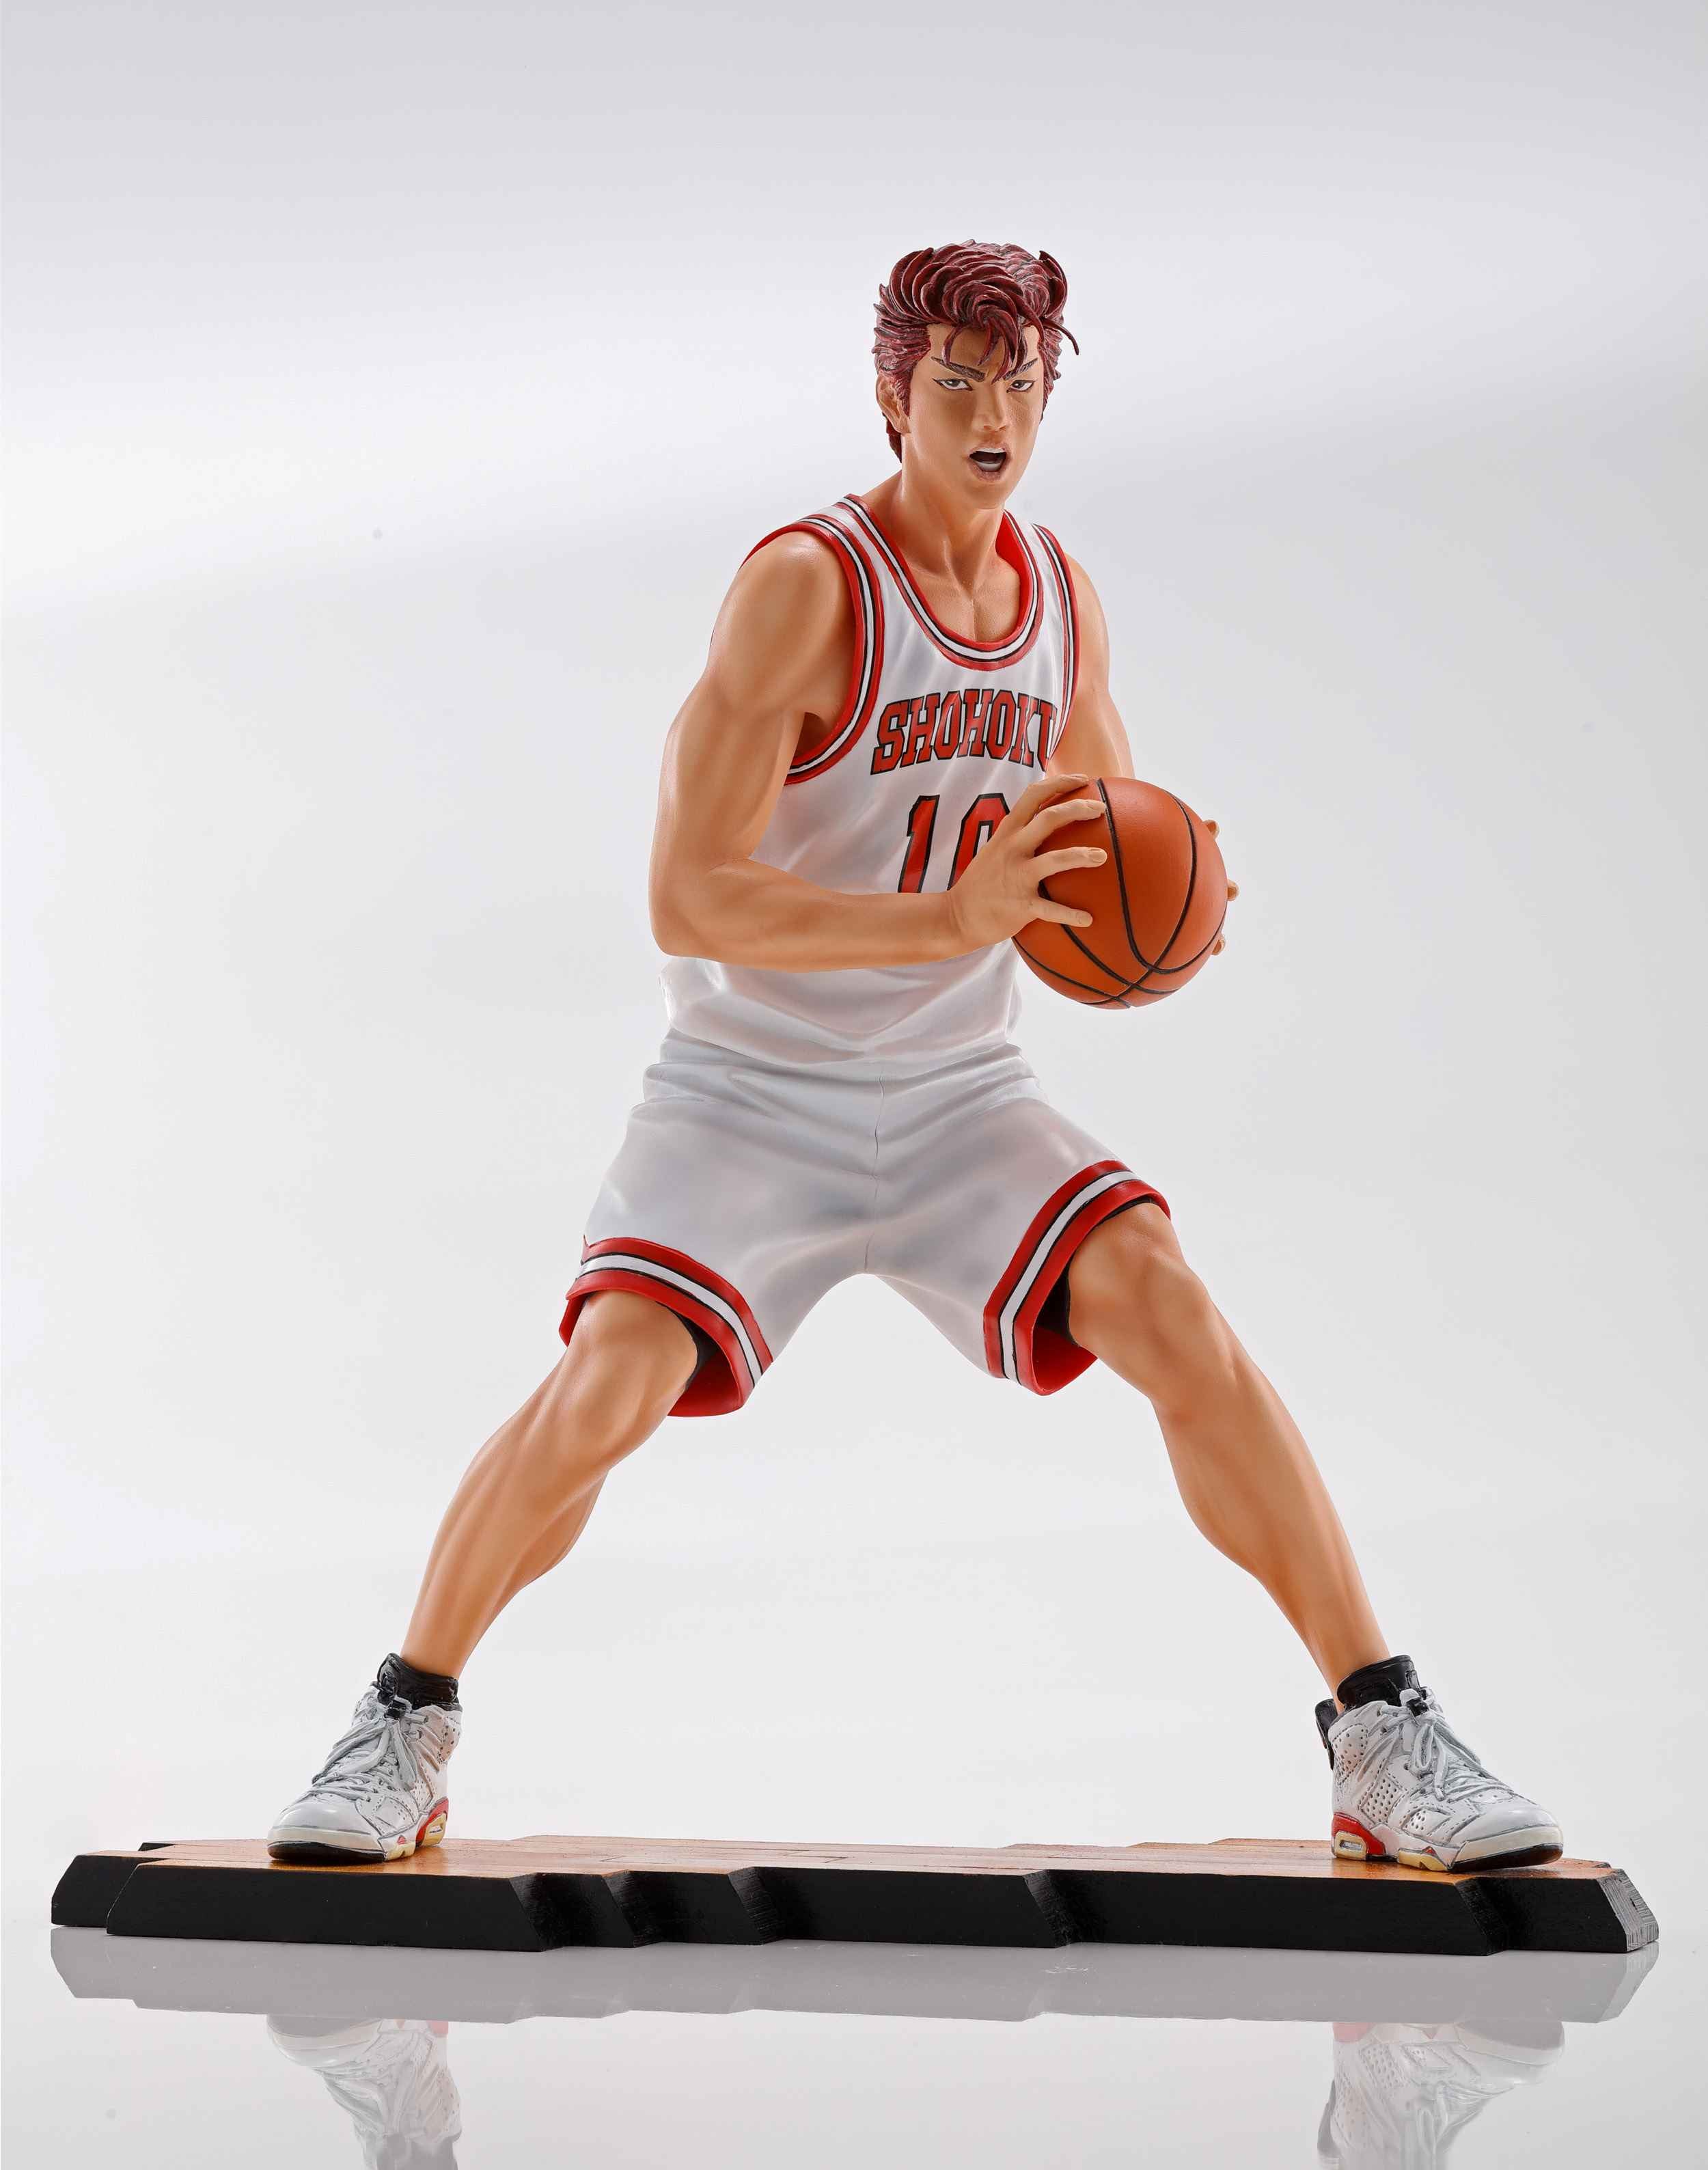 The spirit collection of Inoue Takehiko『 SLAM DUNK 』 Style in The Moment 樱木  花道 特別 限定 away game ver. 人物模型(Figure / 手办) ※附 官方传单